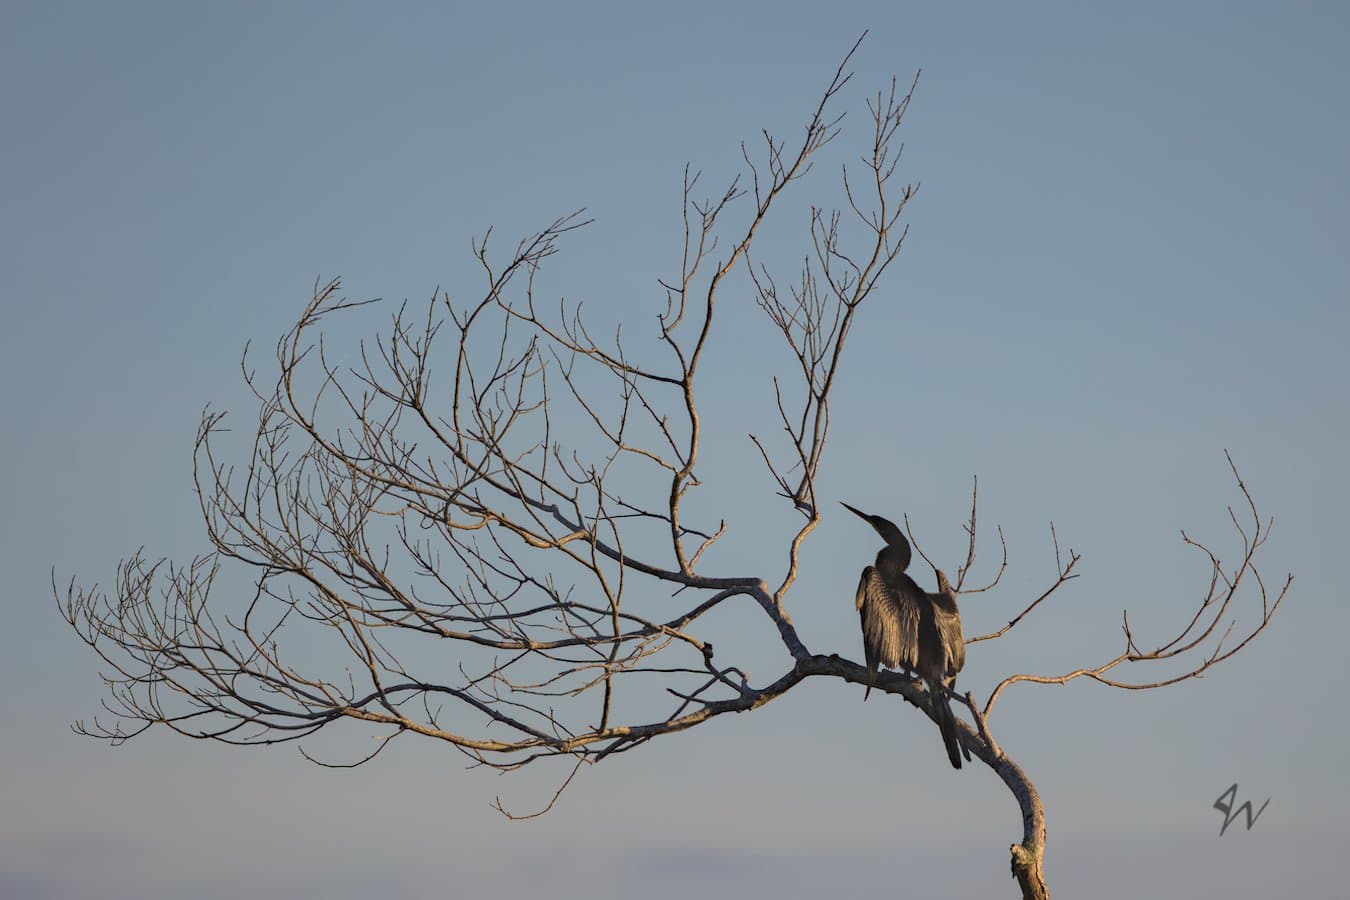 Anhinga drying its wings perched on intricate naked branch.